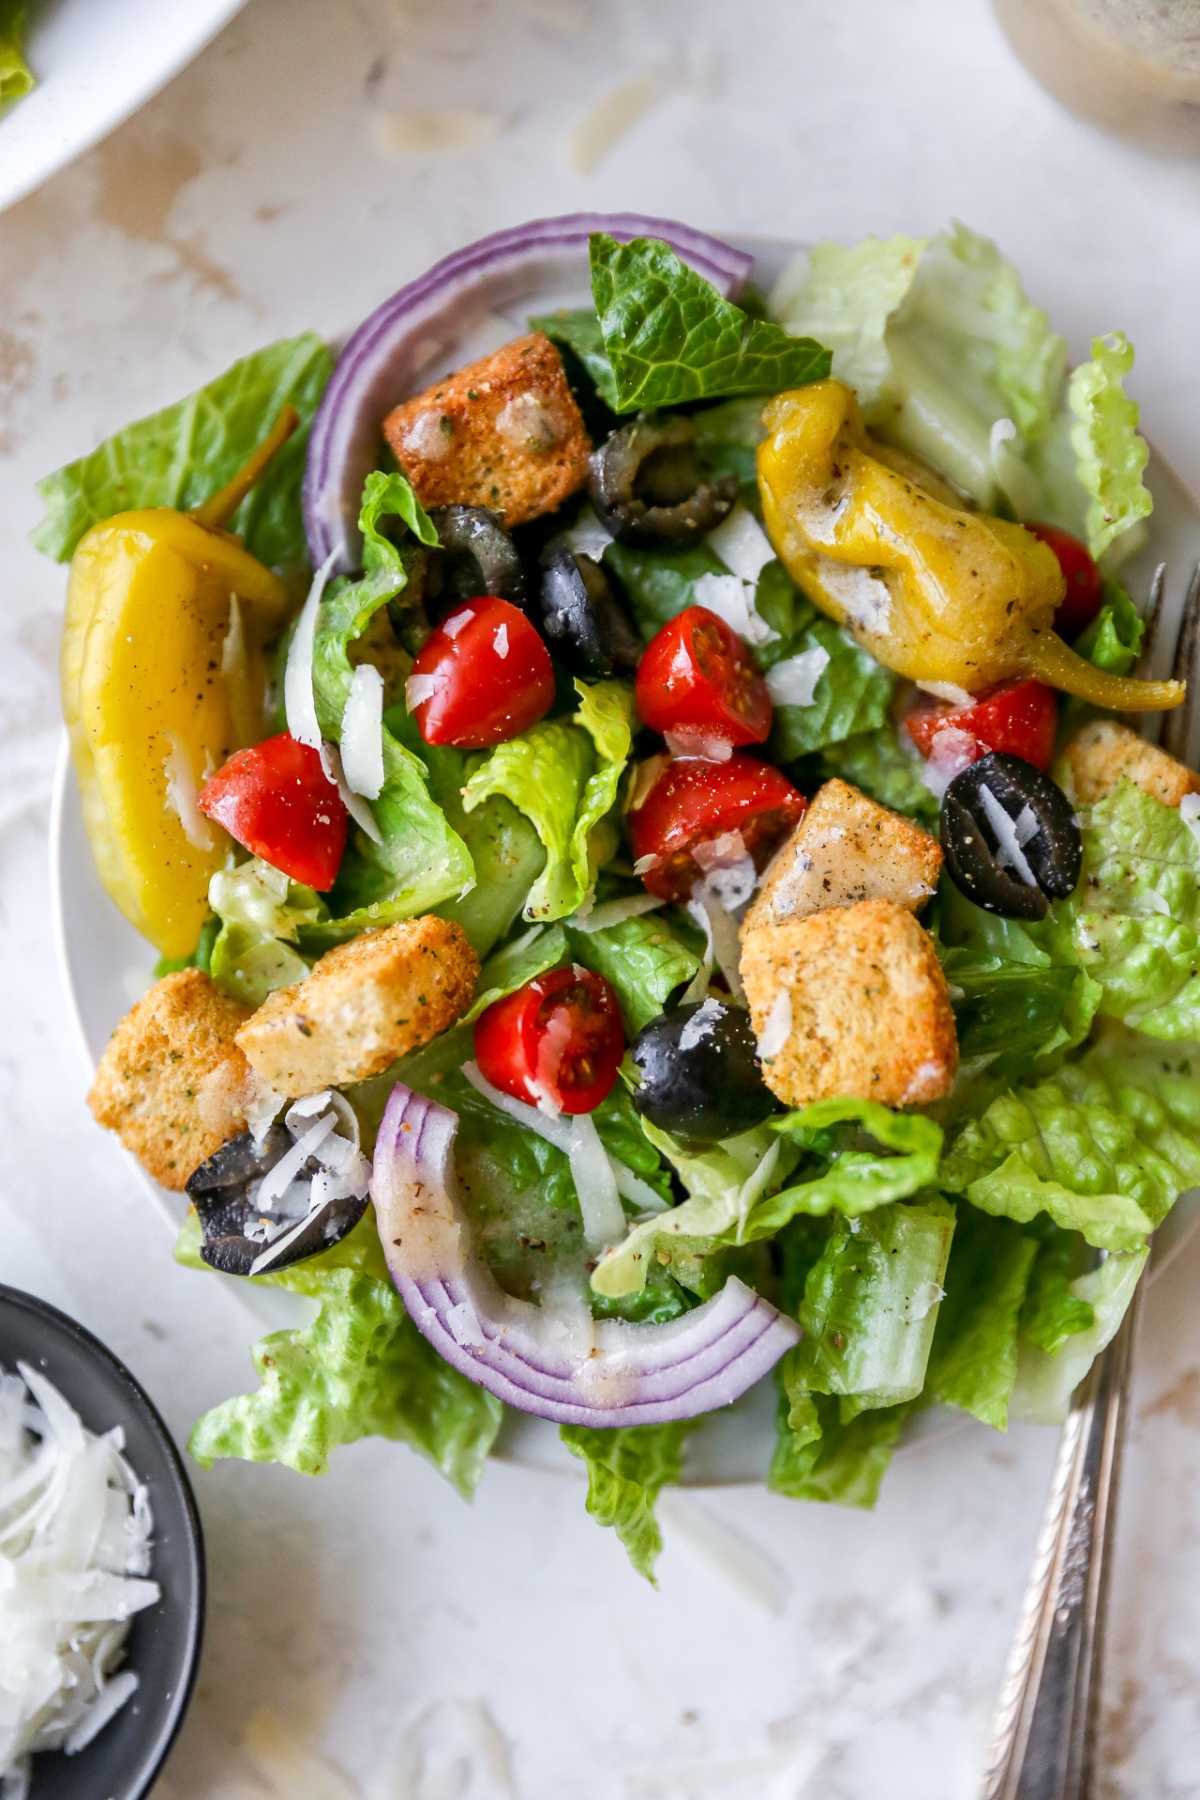 Salad topped with croutons, red onion, tomatoes and dressing.